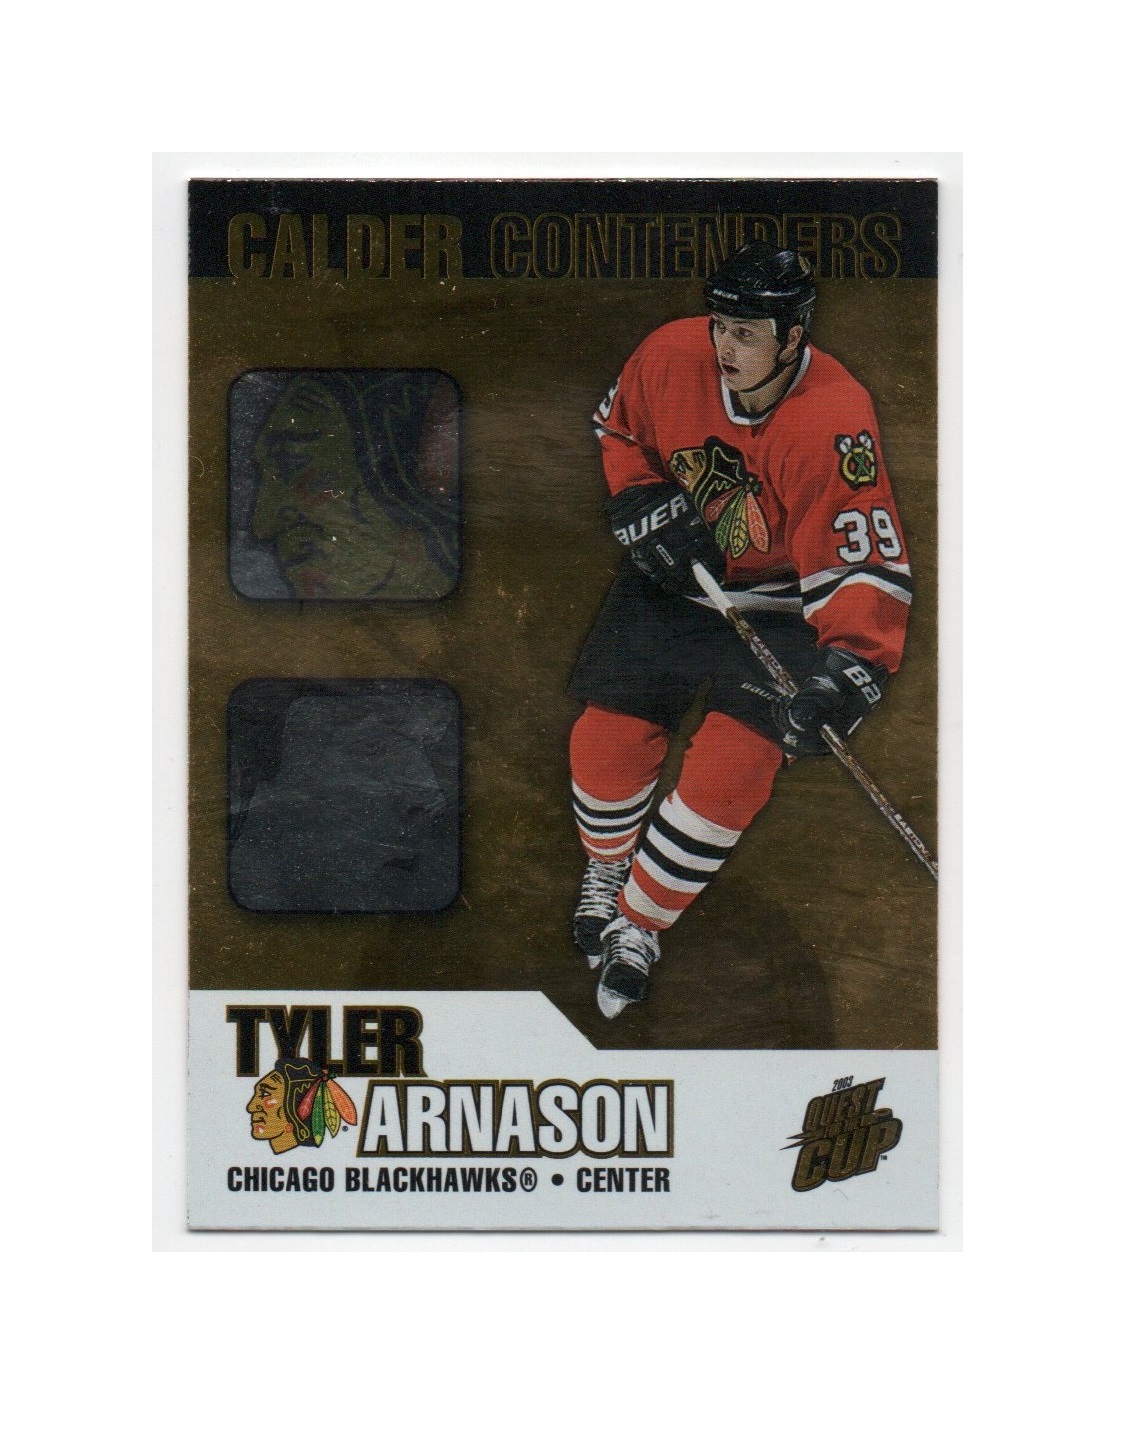 2002-03 Pacific Quest For the Cup Calder Contenders #4 Tyler Arnason (10-X200-BLACKHAWKS)